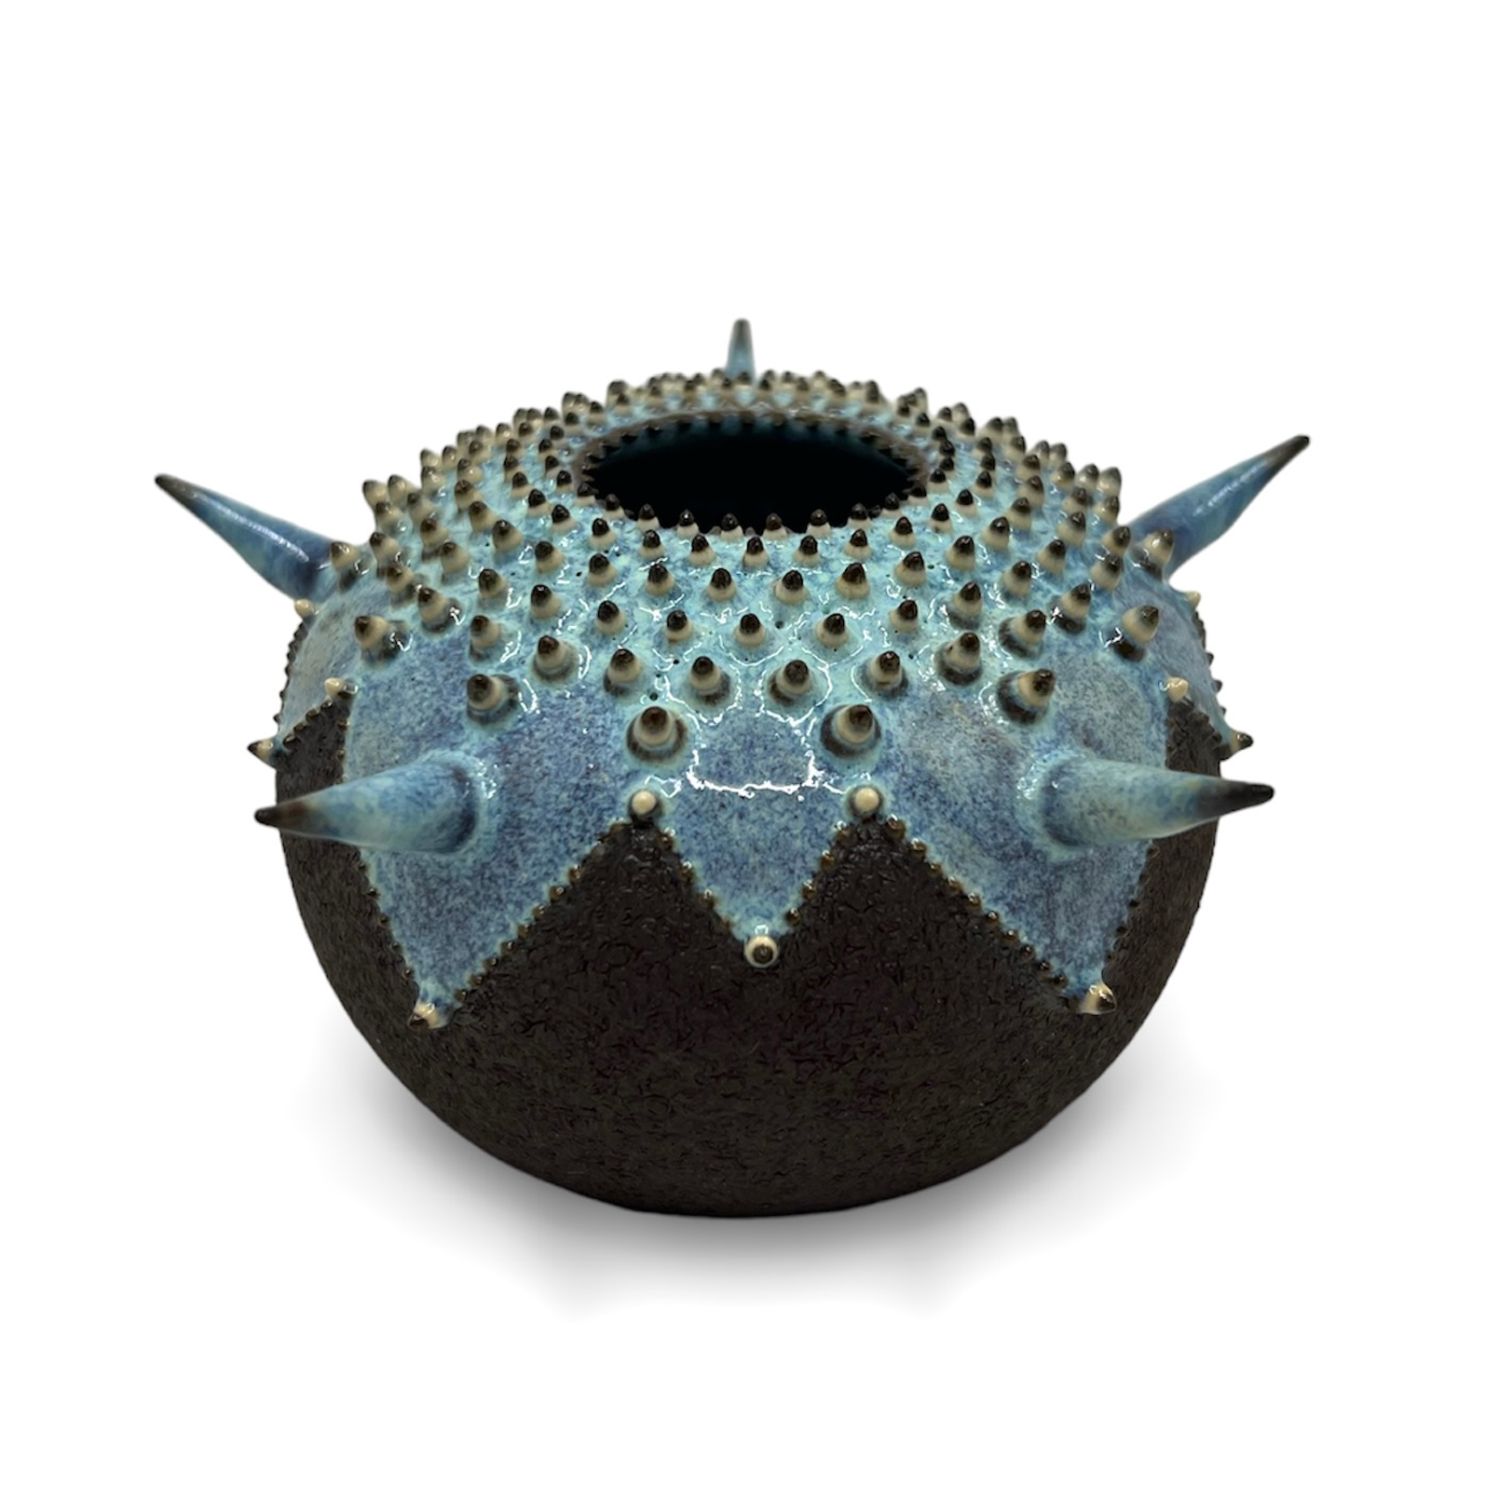 Zara Gardner: Black & Turquoise Urchin Sculpture with Spikes Product Image 3 of 4